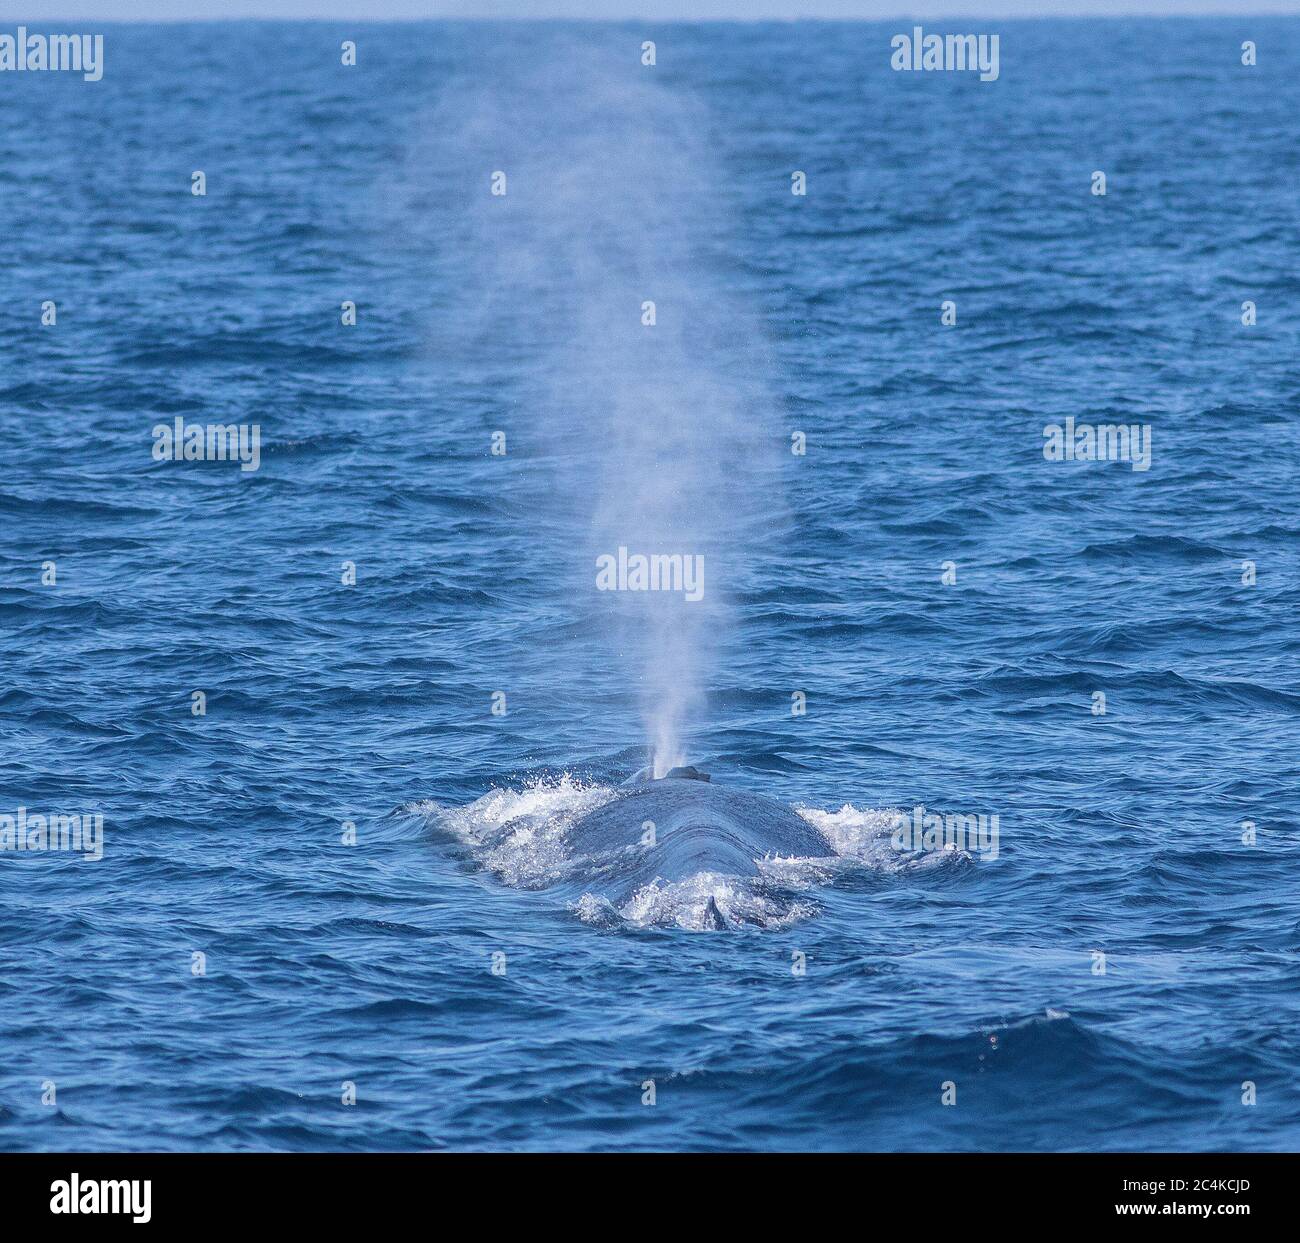 Blue whale blowing out water; whale spouting water from blow hole; whale blow hole; whale spraying water Stock Photo